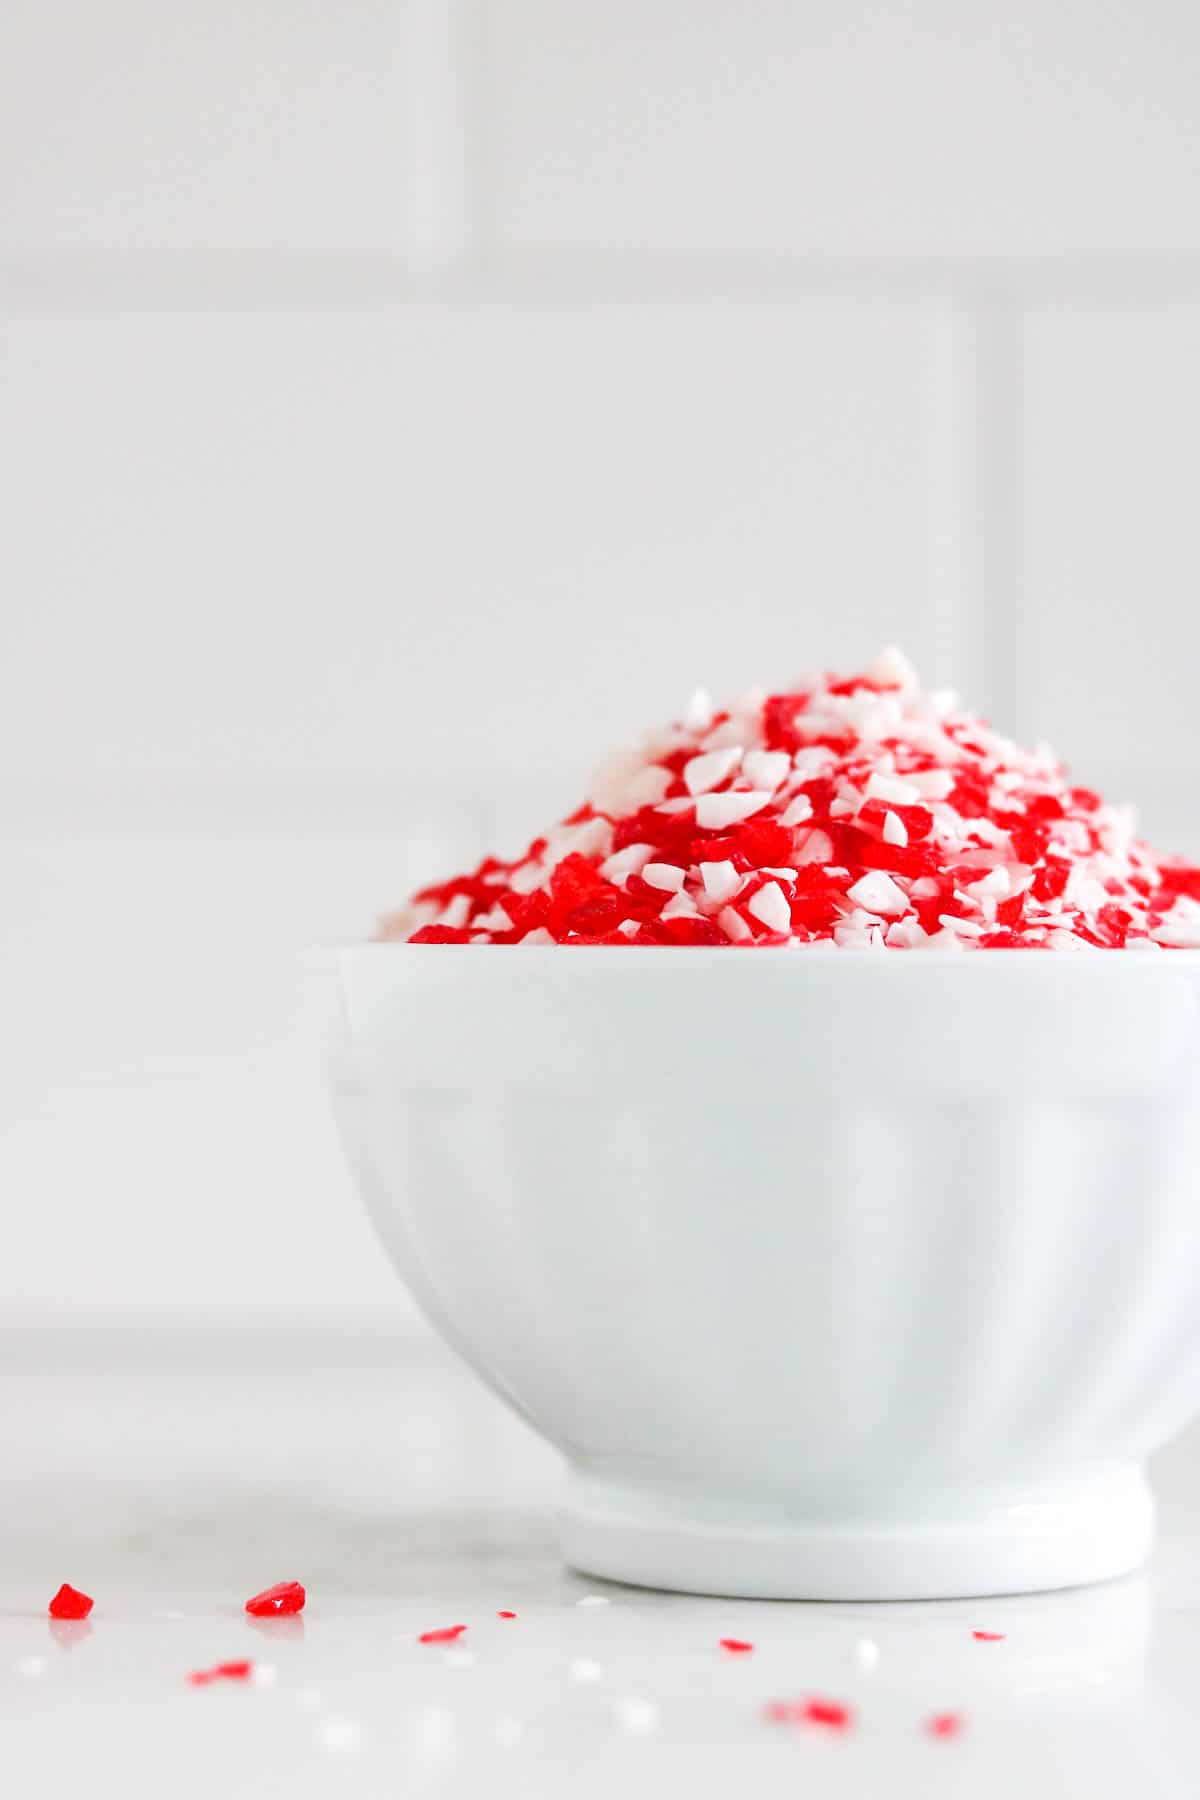 Crushed candy cane peices 